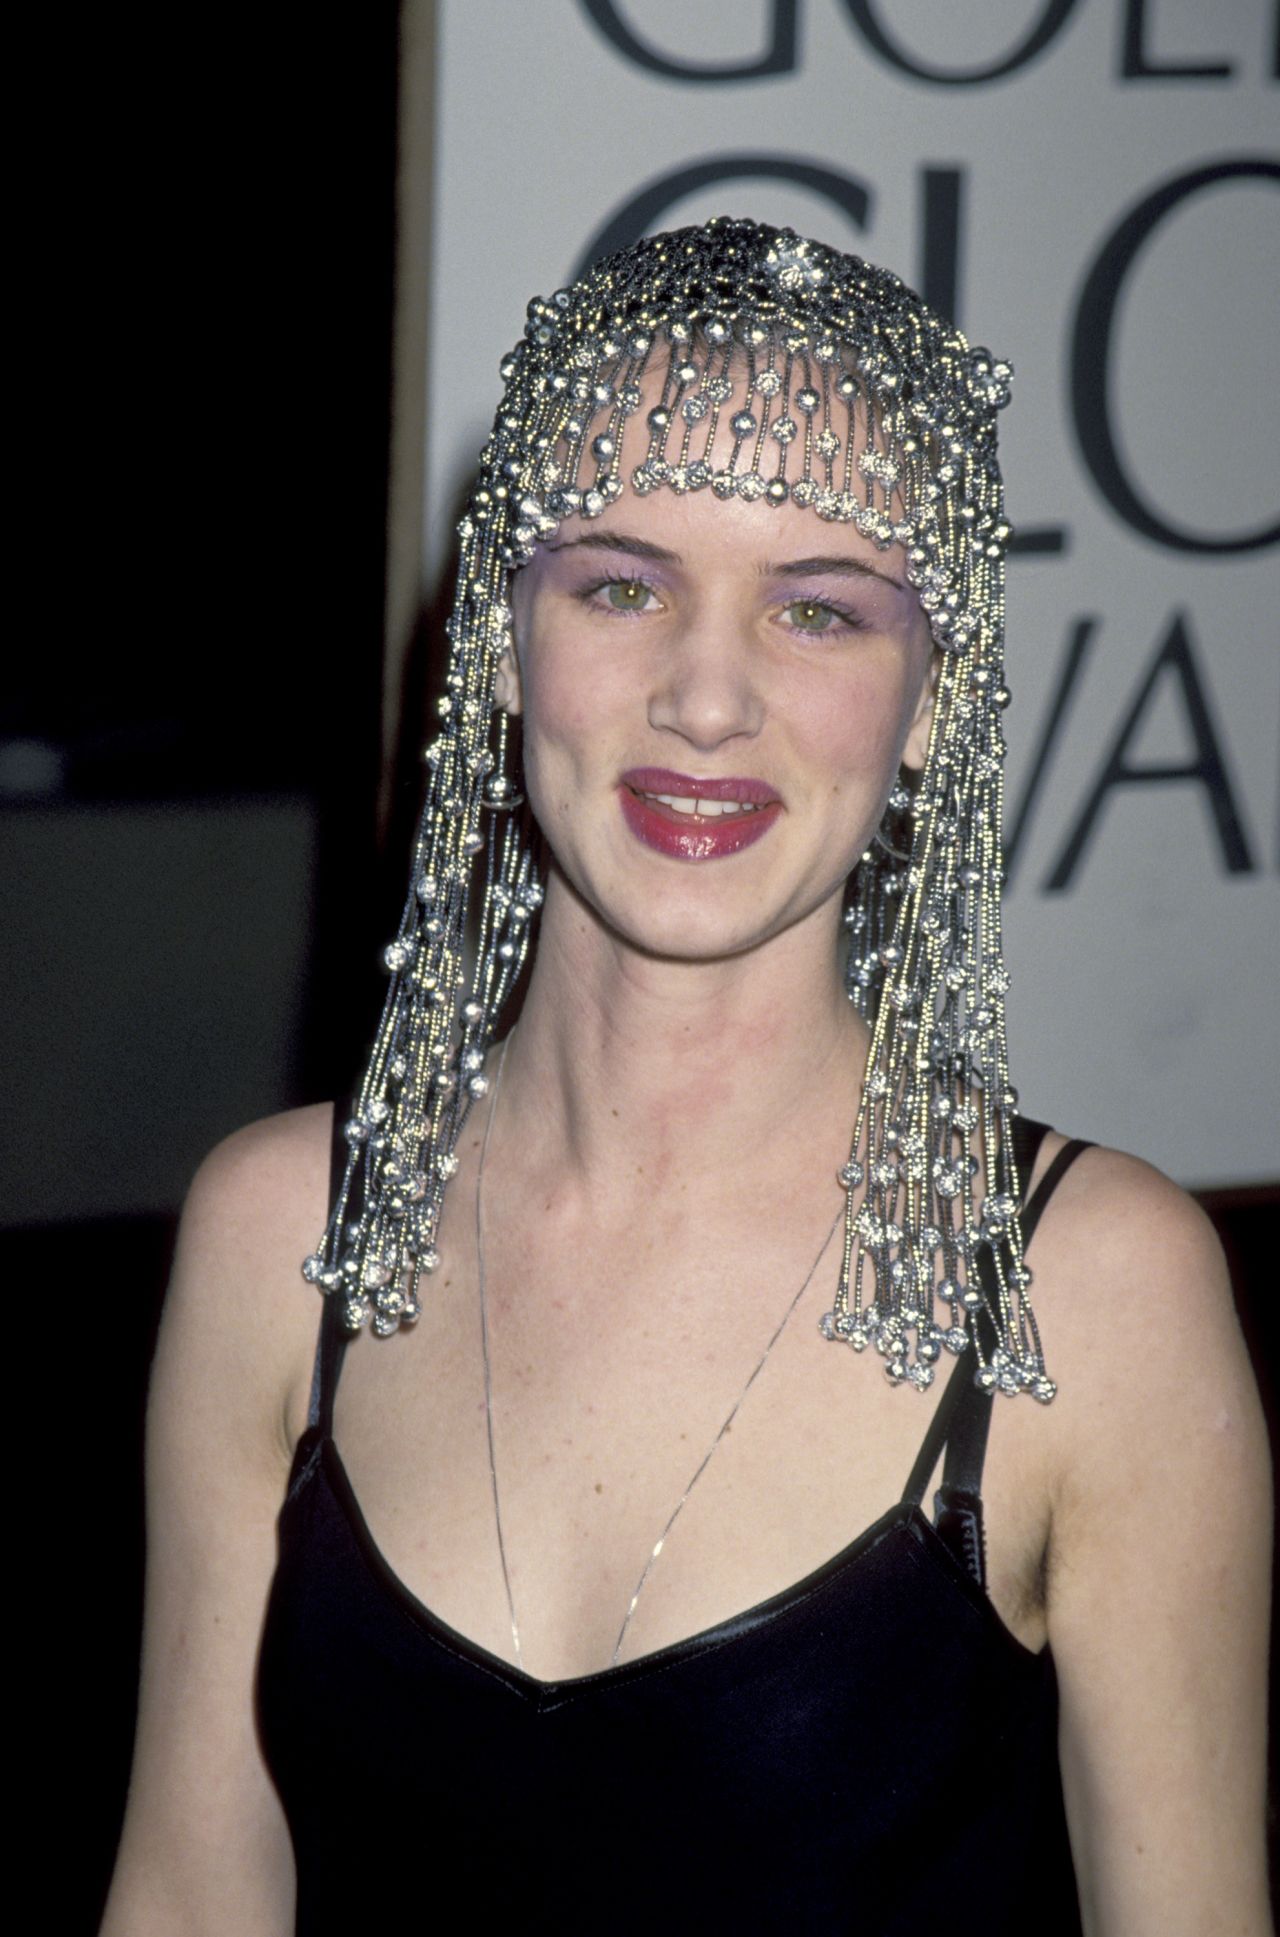 E for (Ancient) Egypt: Long before cultural appropriation had a name, Juliette Lewis walked the red carpet in a Cleopatra-style headdress. (Juliette Lewis, 1994)